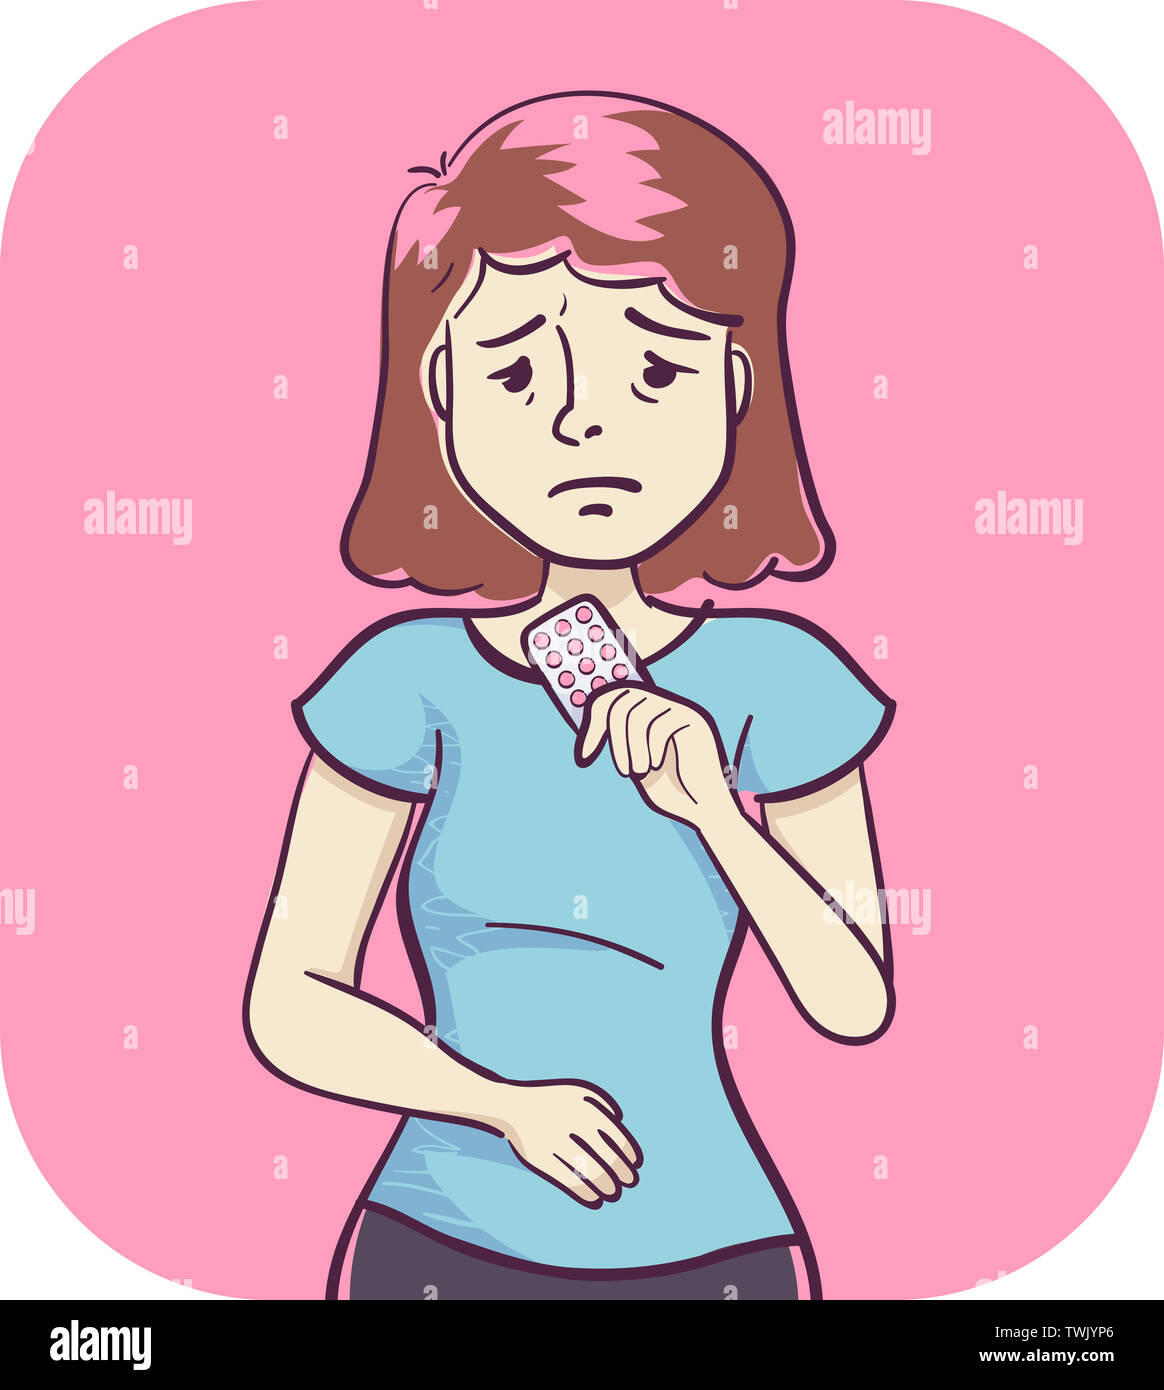 Illustration of a Girl Looking at a Blister Pack of Contraceptive Pills She Is Taking for Menstrual Issues Stock Photo